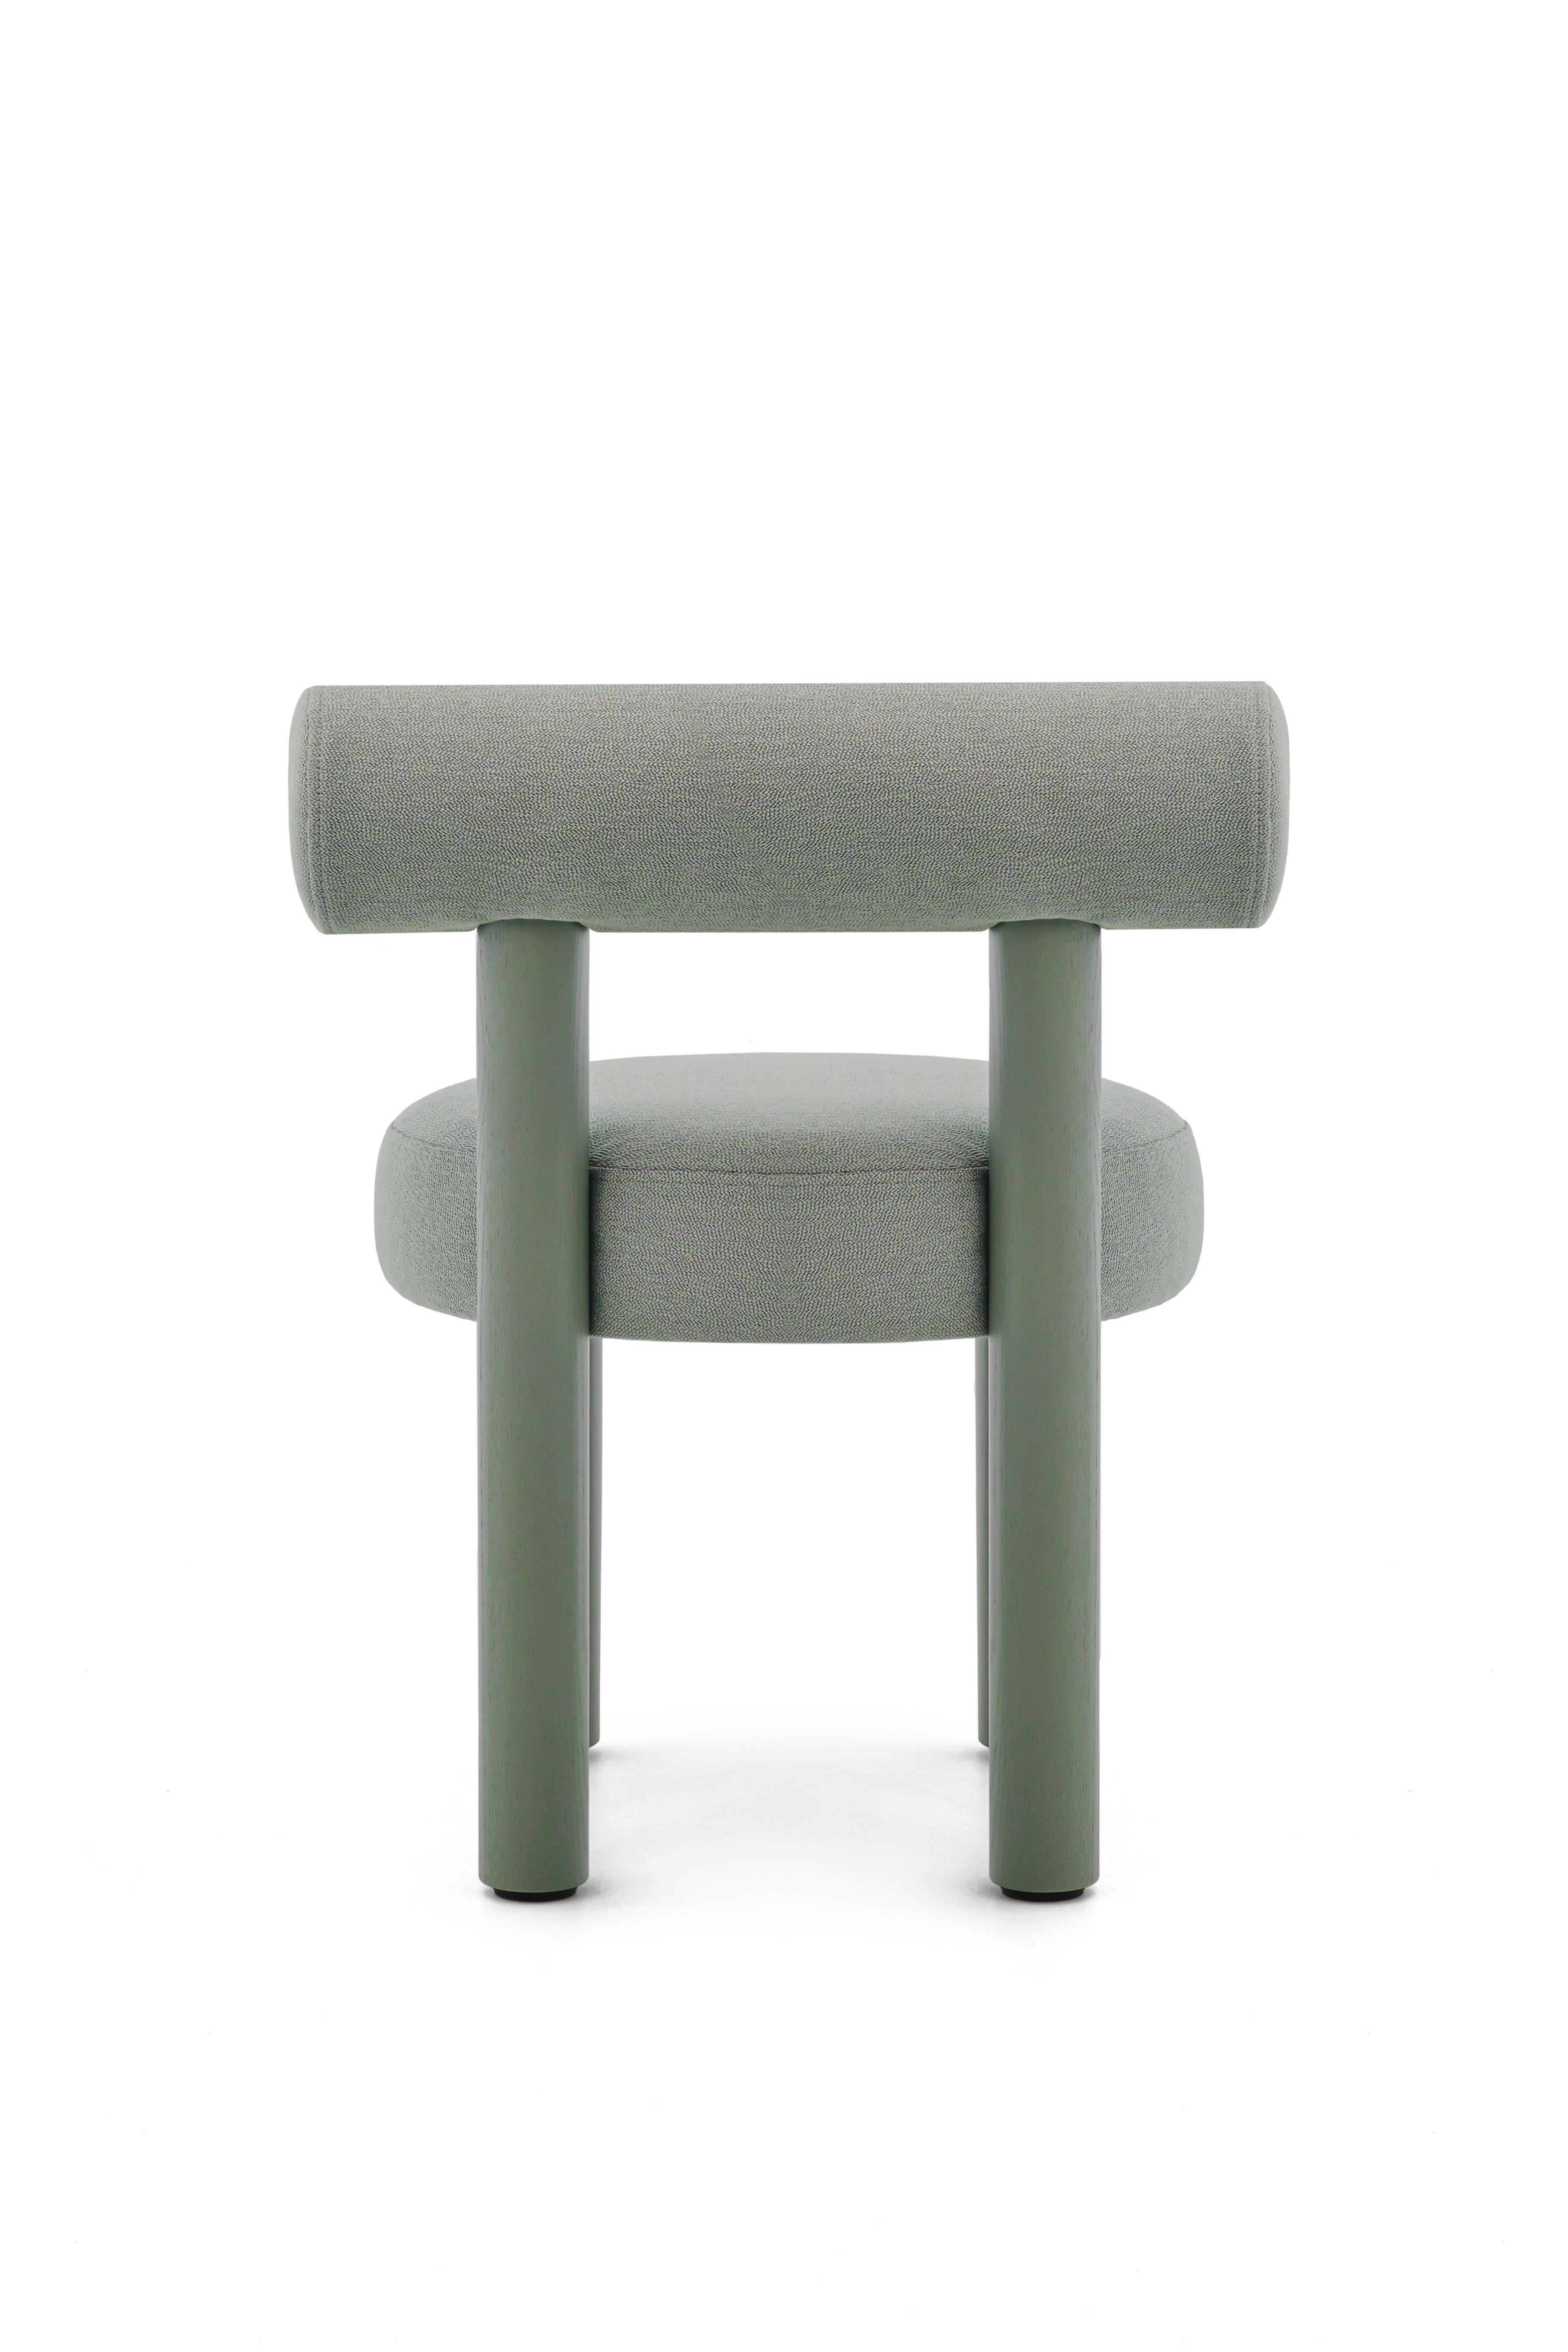 Contemporary Wooden Chair 'Gropius Cs2' by Noom, Arco Rohi Aqua For Sale 4